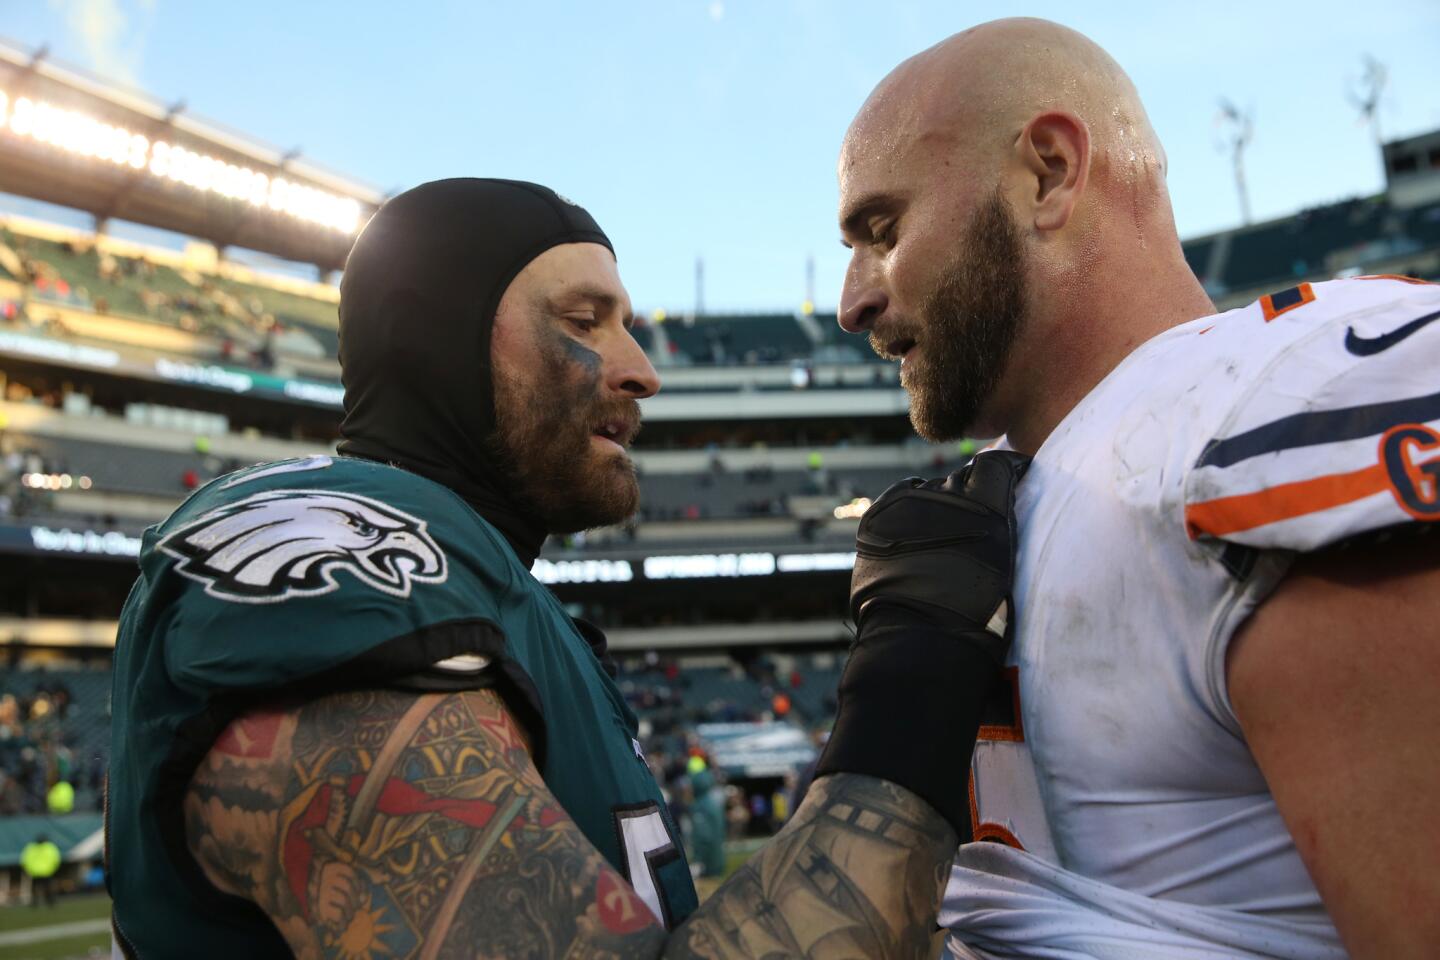 Eagles defensive end Chris Long, left, talks to his brother, Bears offensive guard Kyle Long, after an Eagles 31-3 win at Lincoln Financial Field in Philadelphia on Sunday, Nov. 26, 2017.